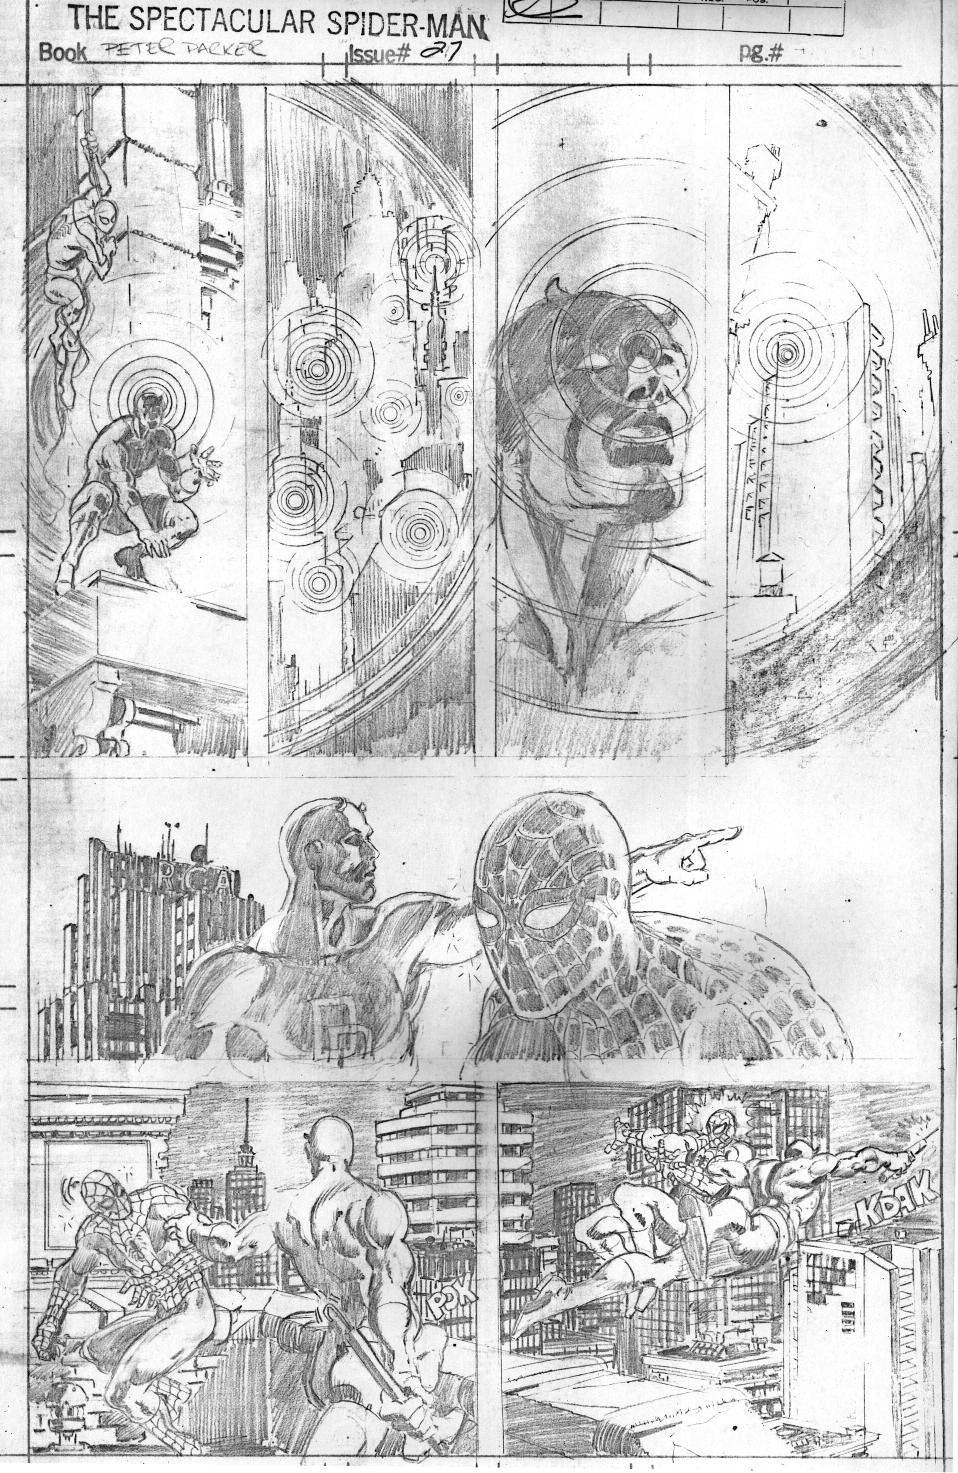 travisellisor:
“ page 14 pencils by Frank Miller from The Spectacular Spider-Man #27
”